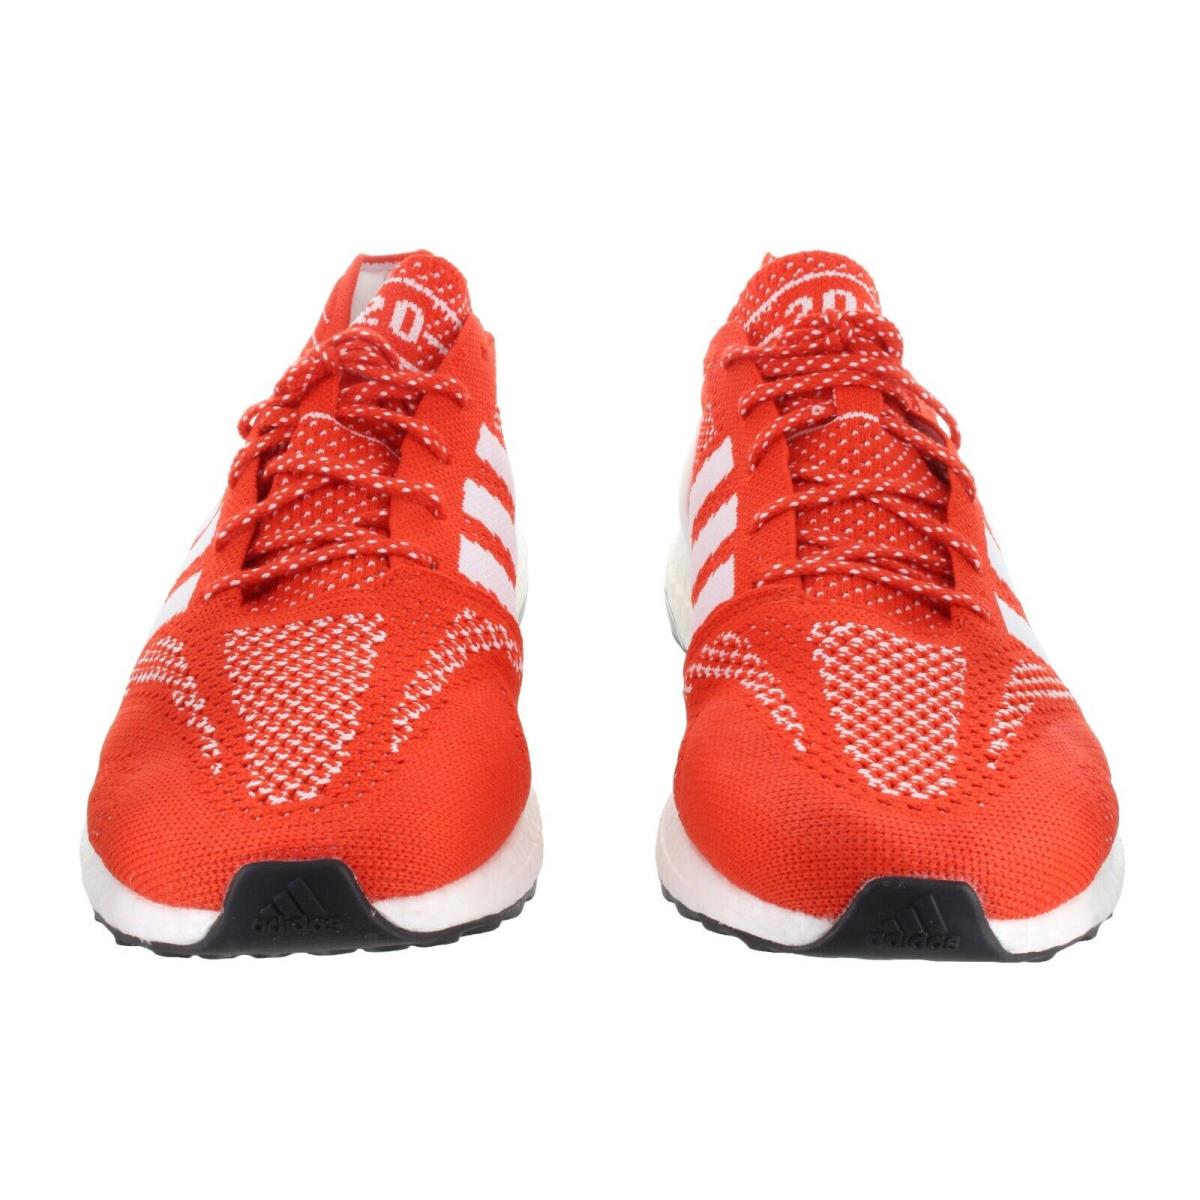 Adidas shoes Ultraboost DNA Prime - Active Red, Cloud White, Core Black 0